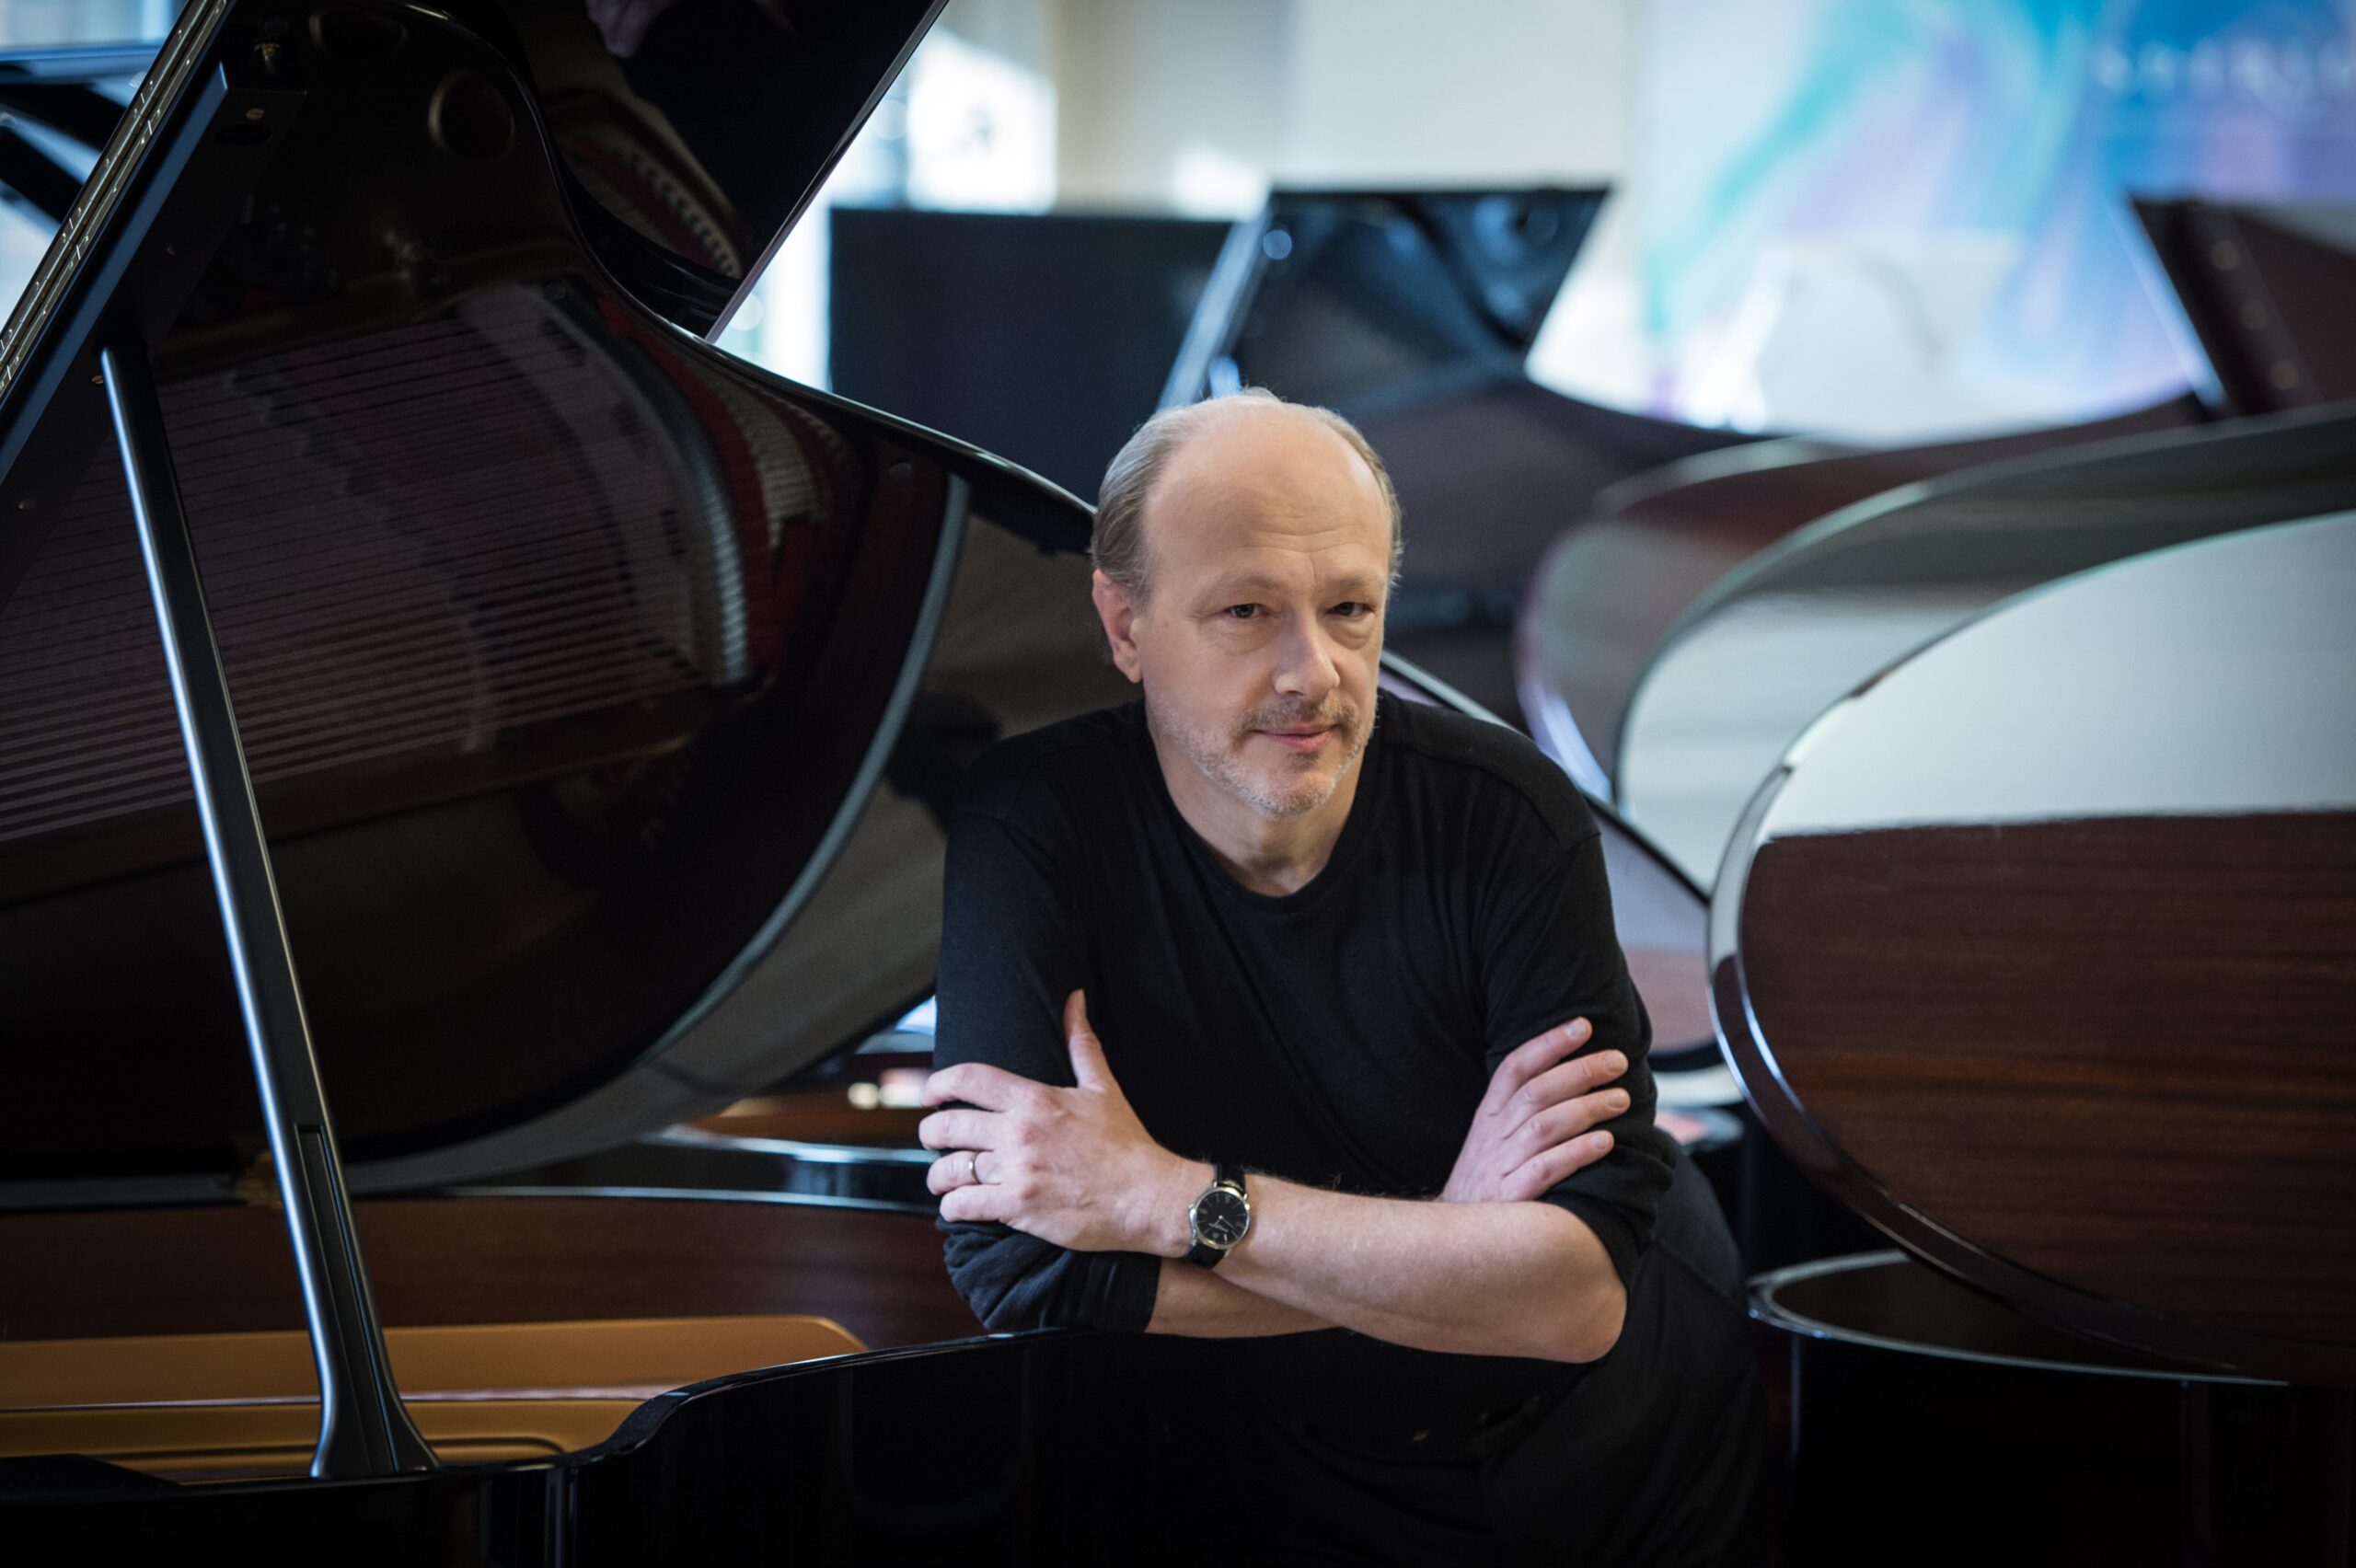 Marc-André Hamelin poses with many pianos.